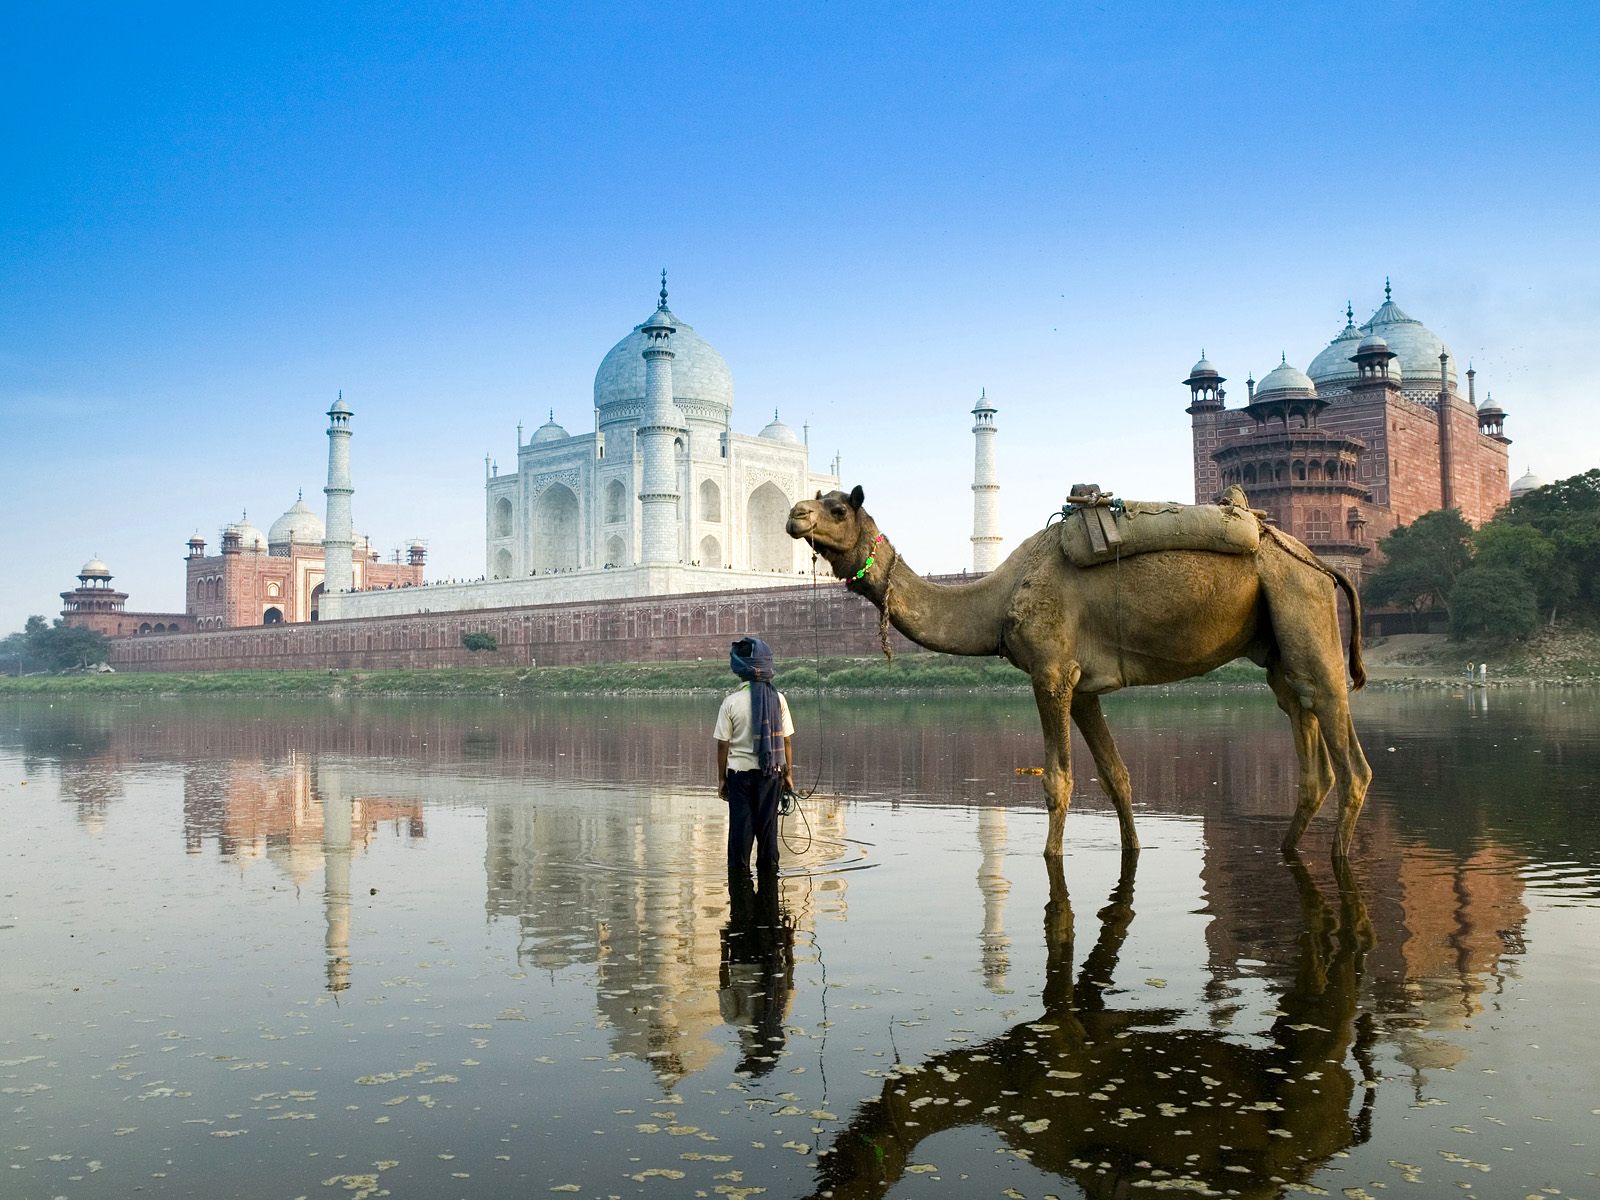 Agra – A Timeless Old City Still Clinging To Its Glorious Past